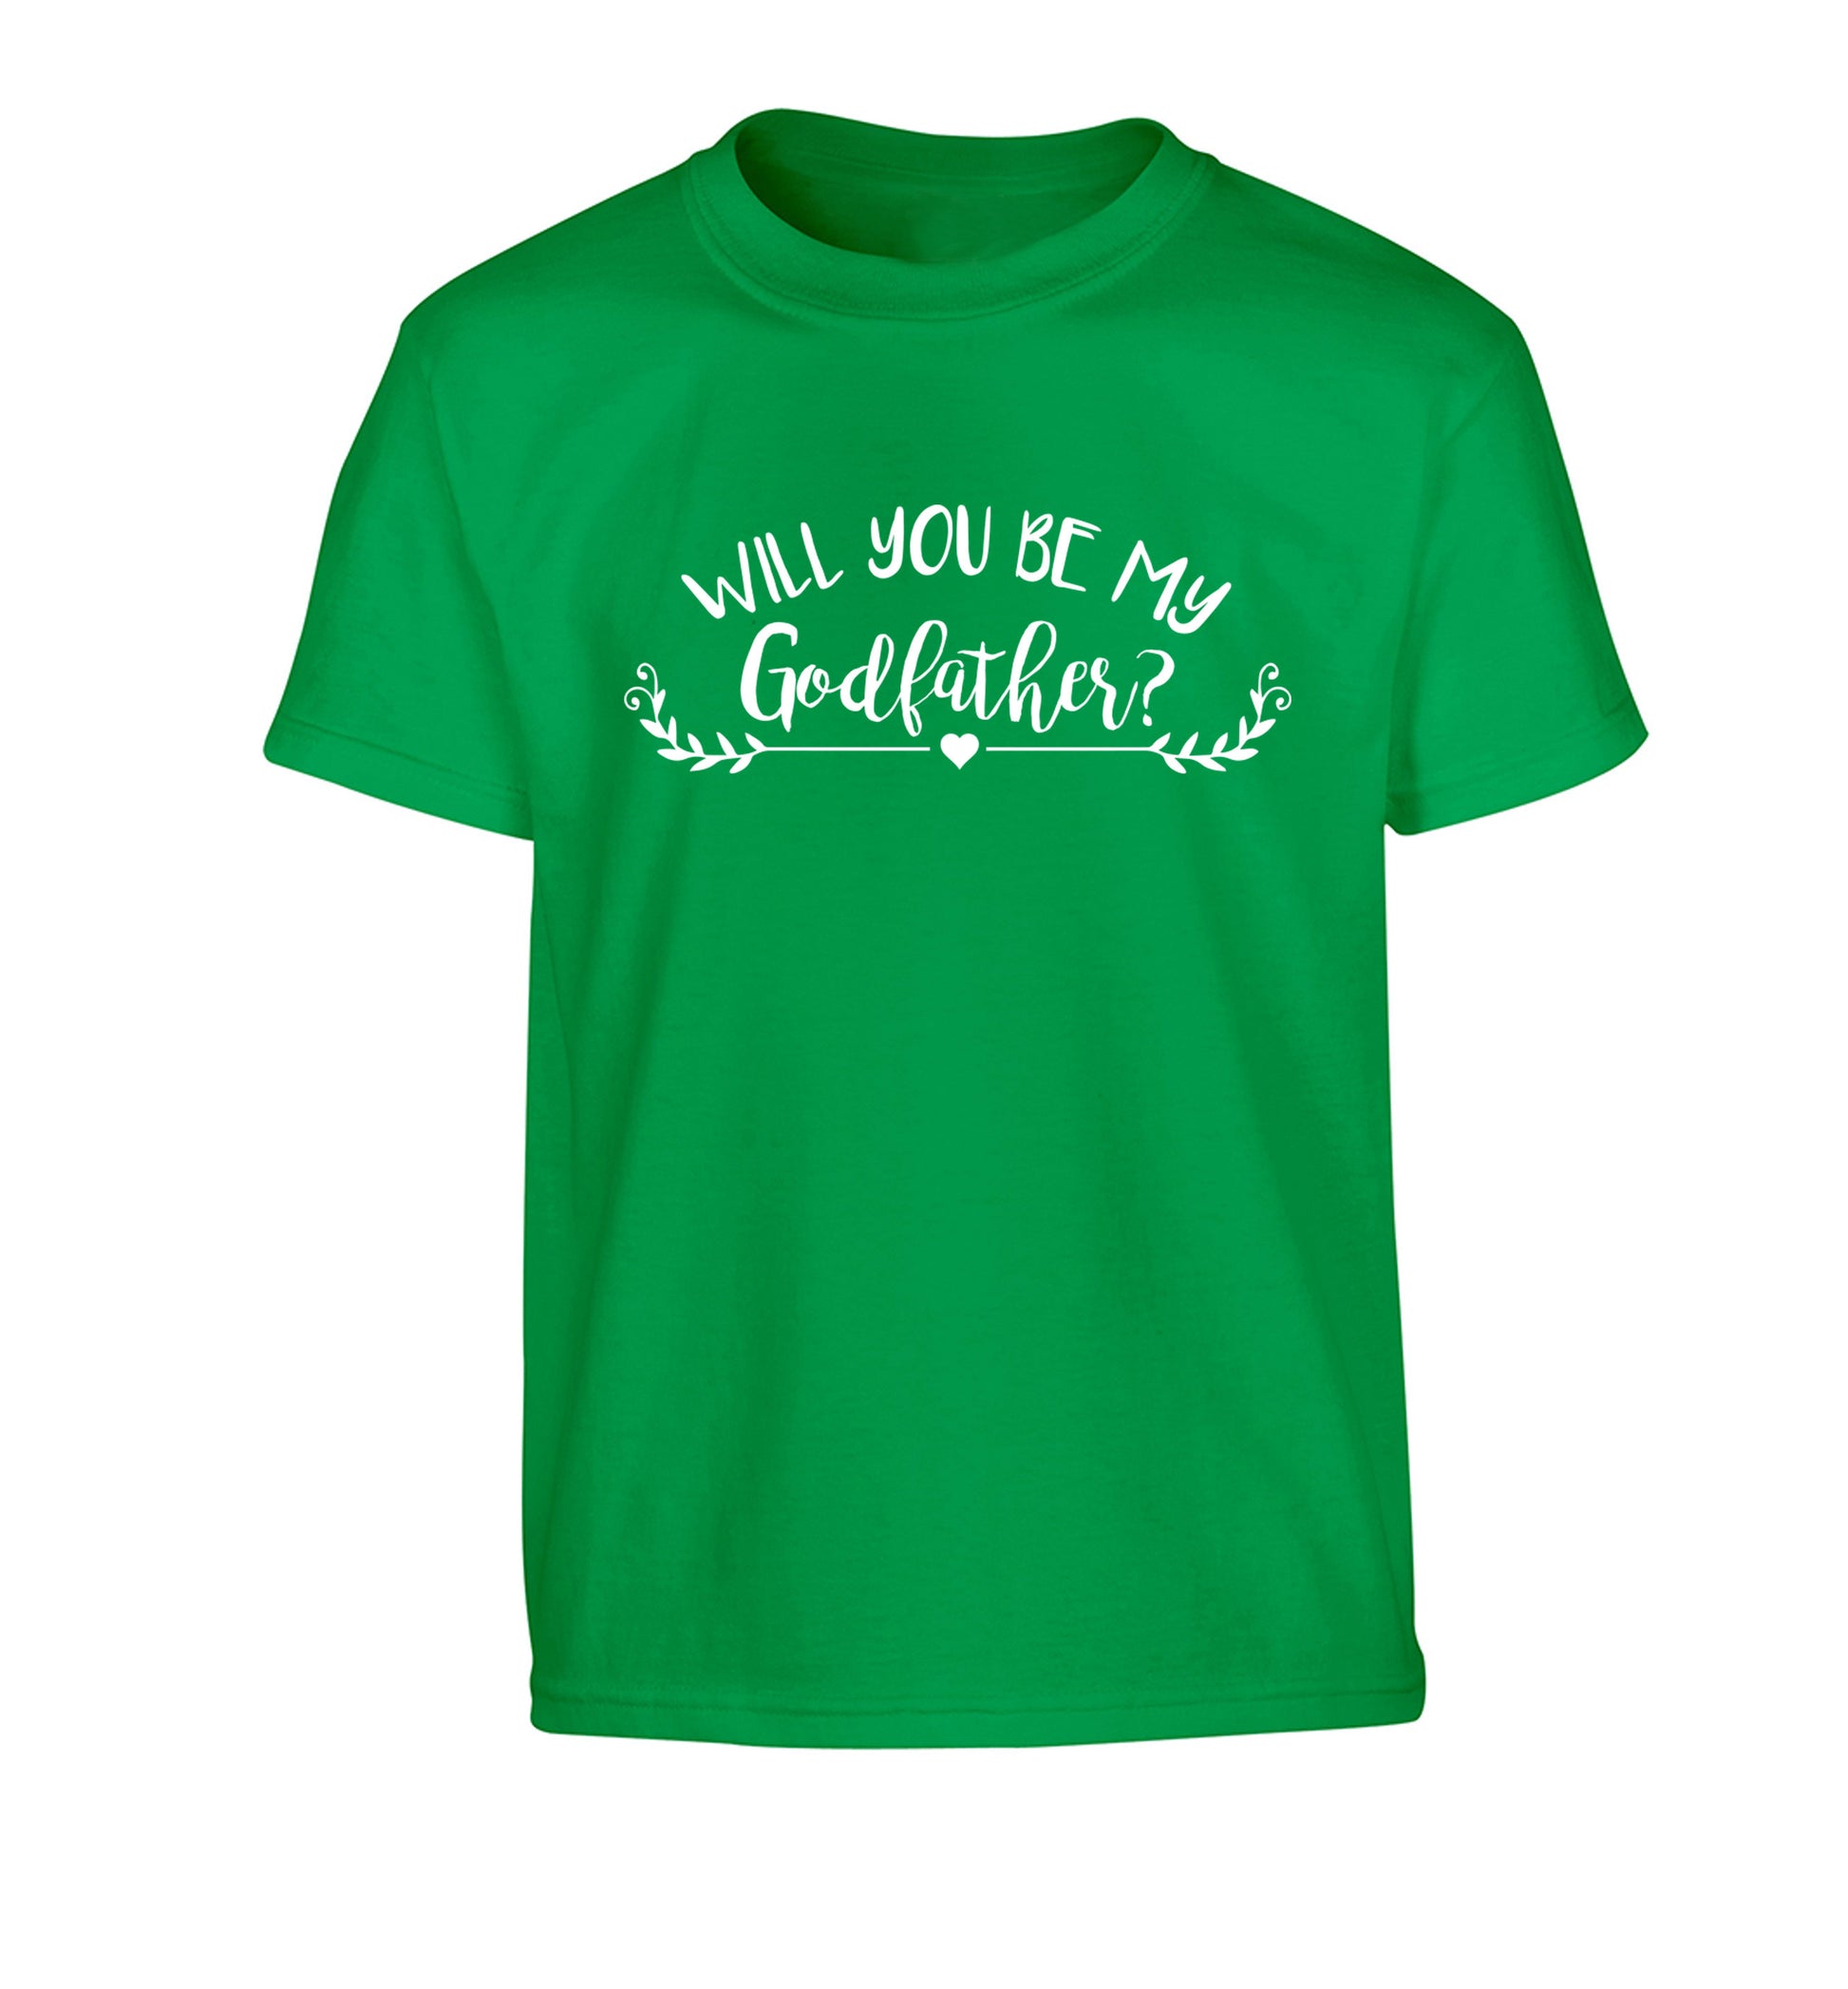 Will you be my godfather? Children's green Tshirt 12-14 Years